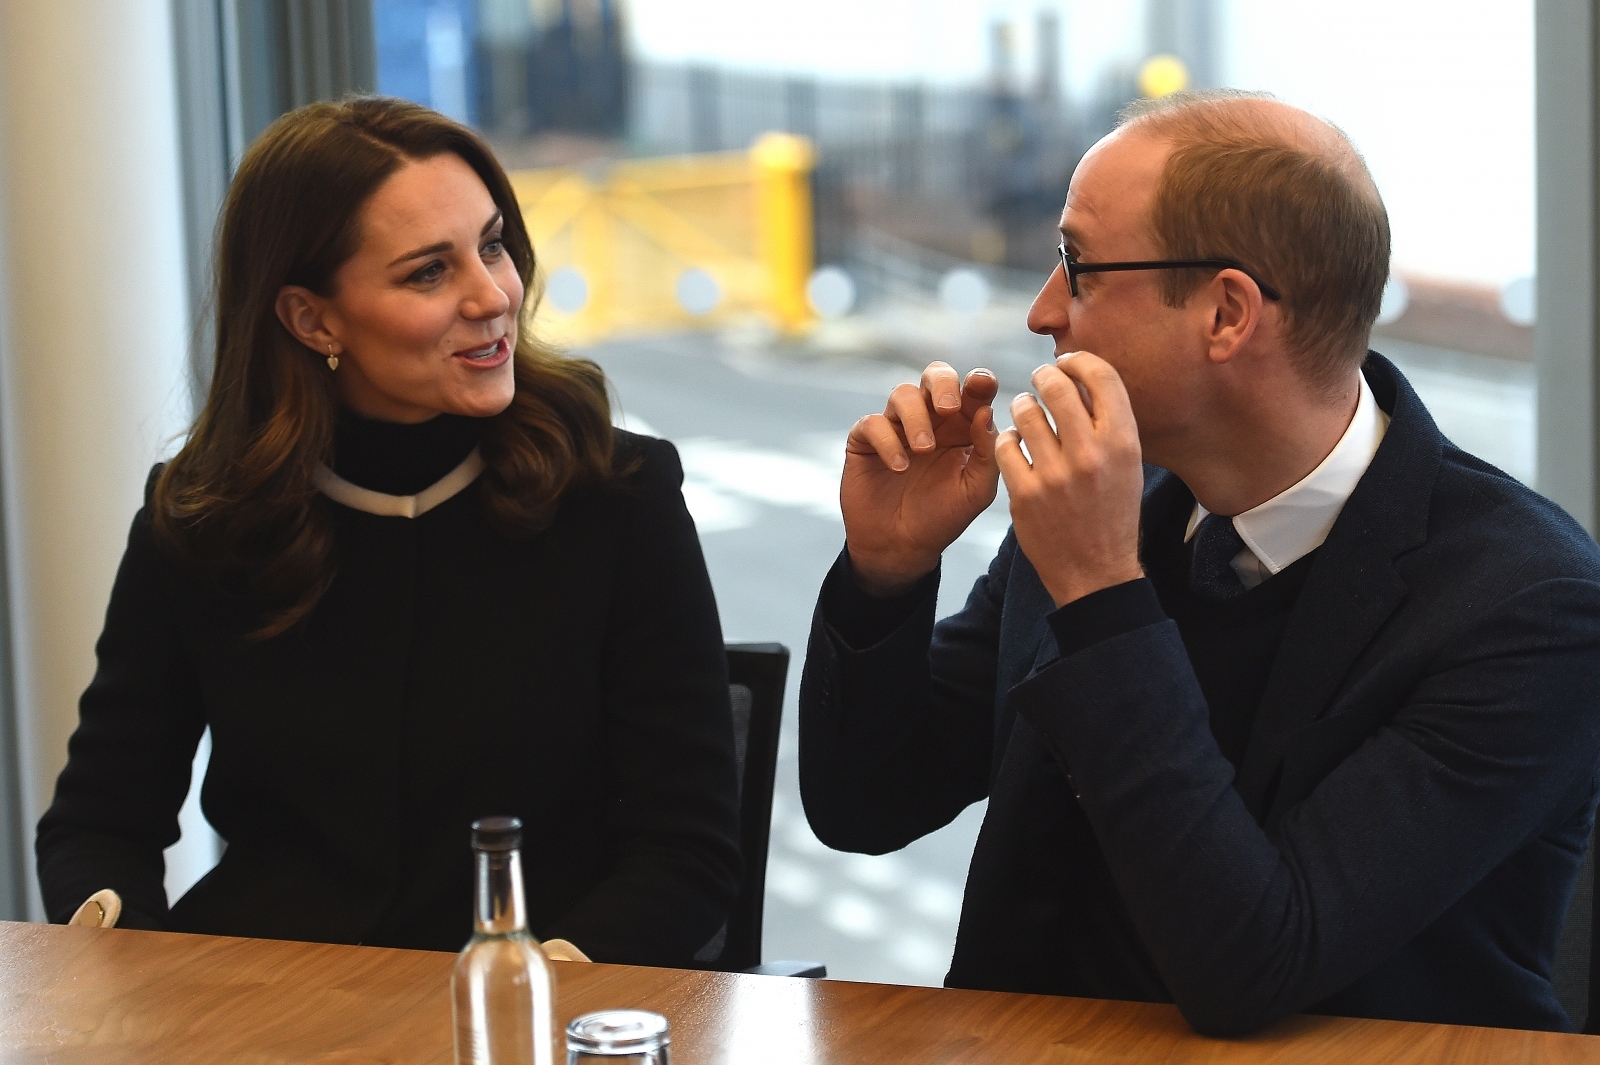 What is the secret project coming up for Prince William and Kate ...